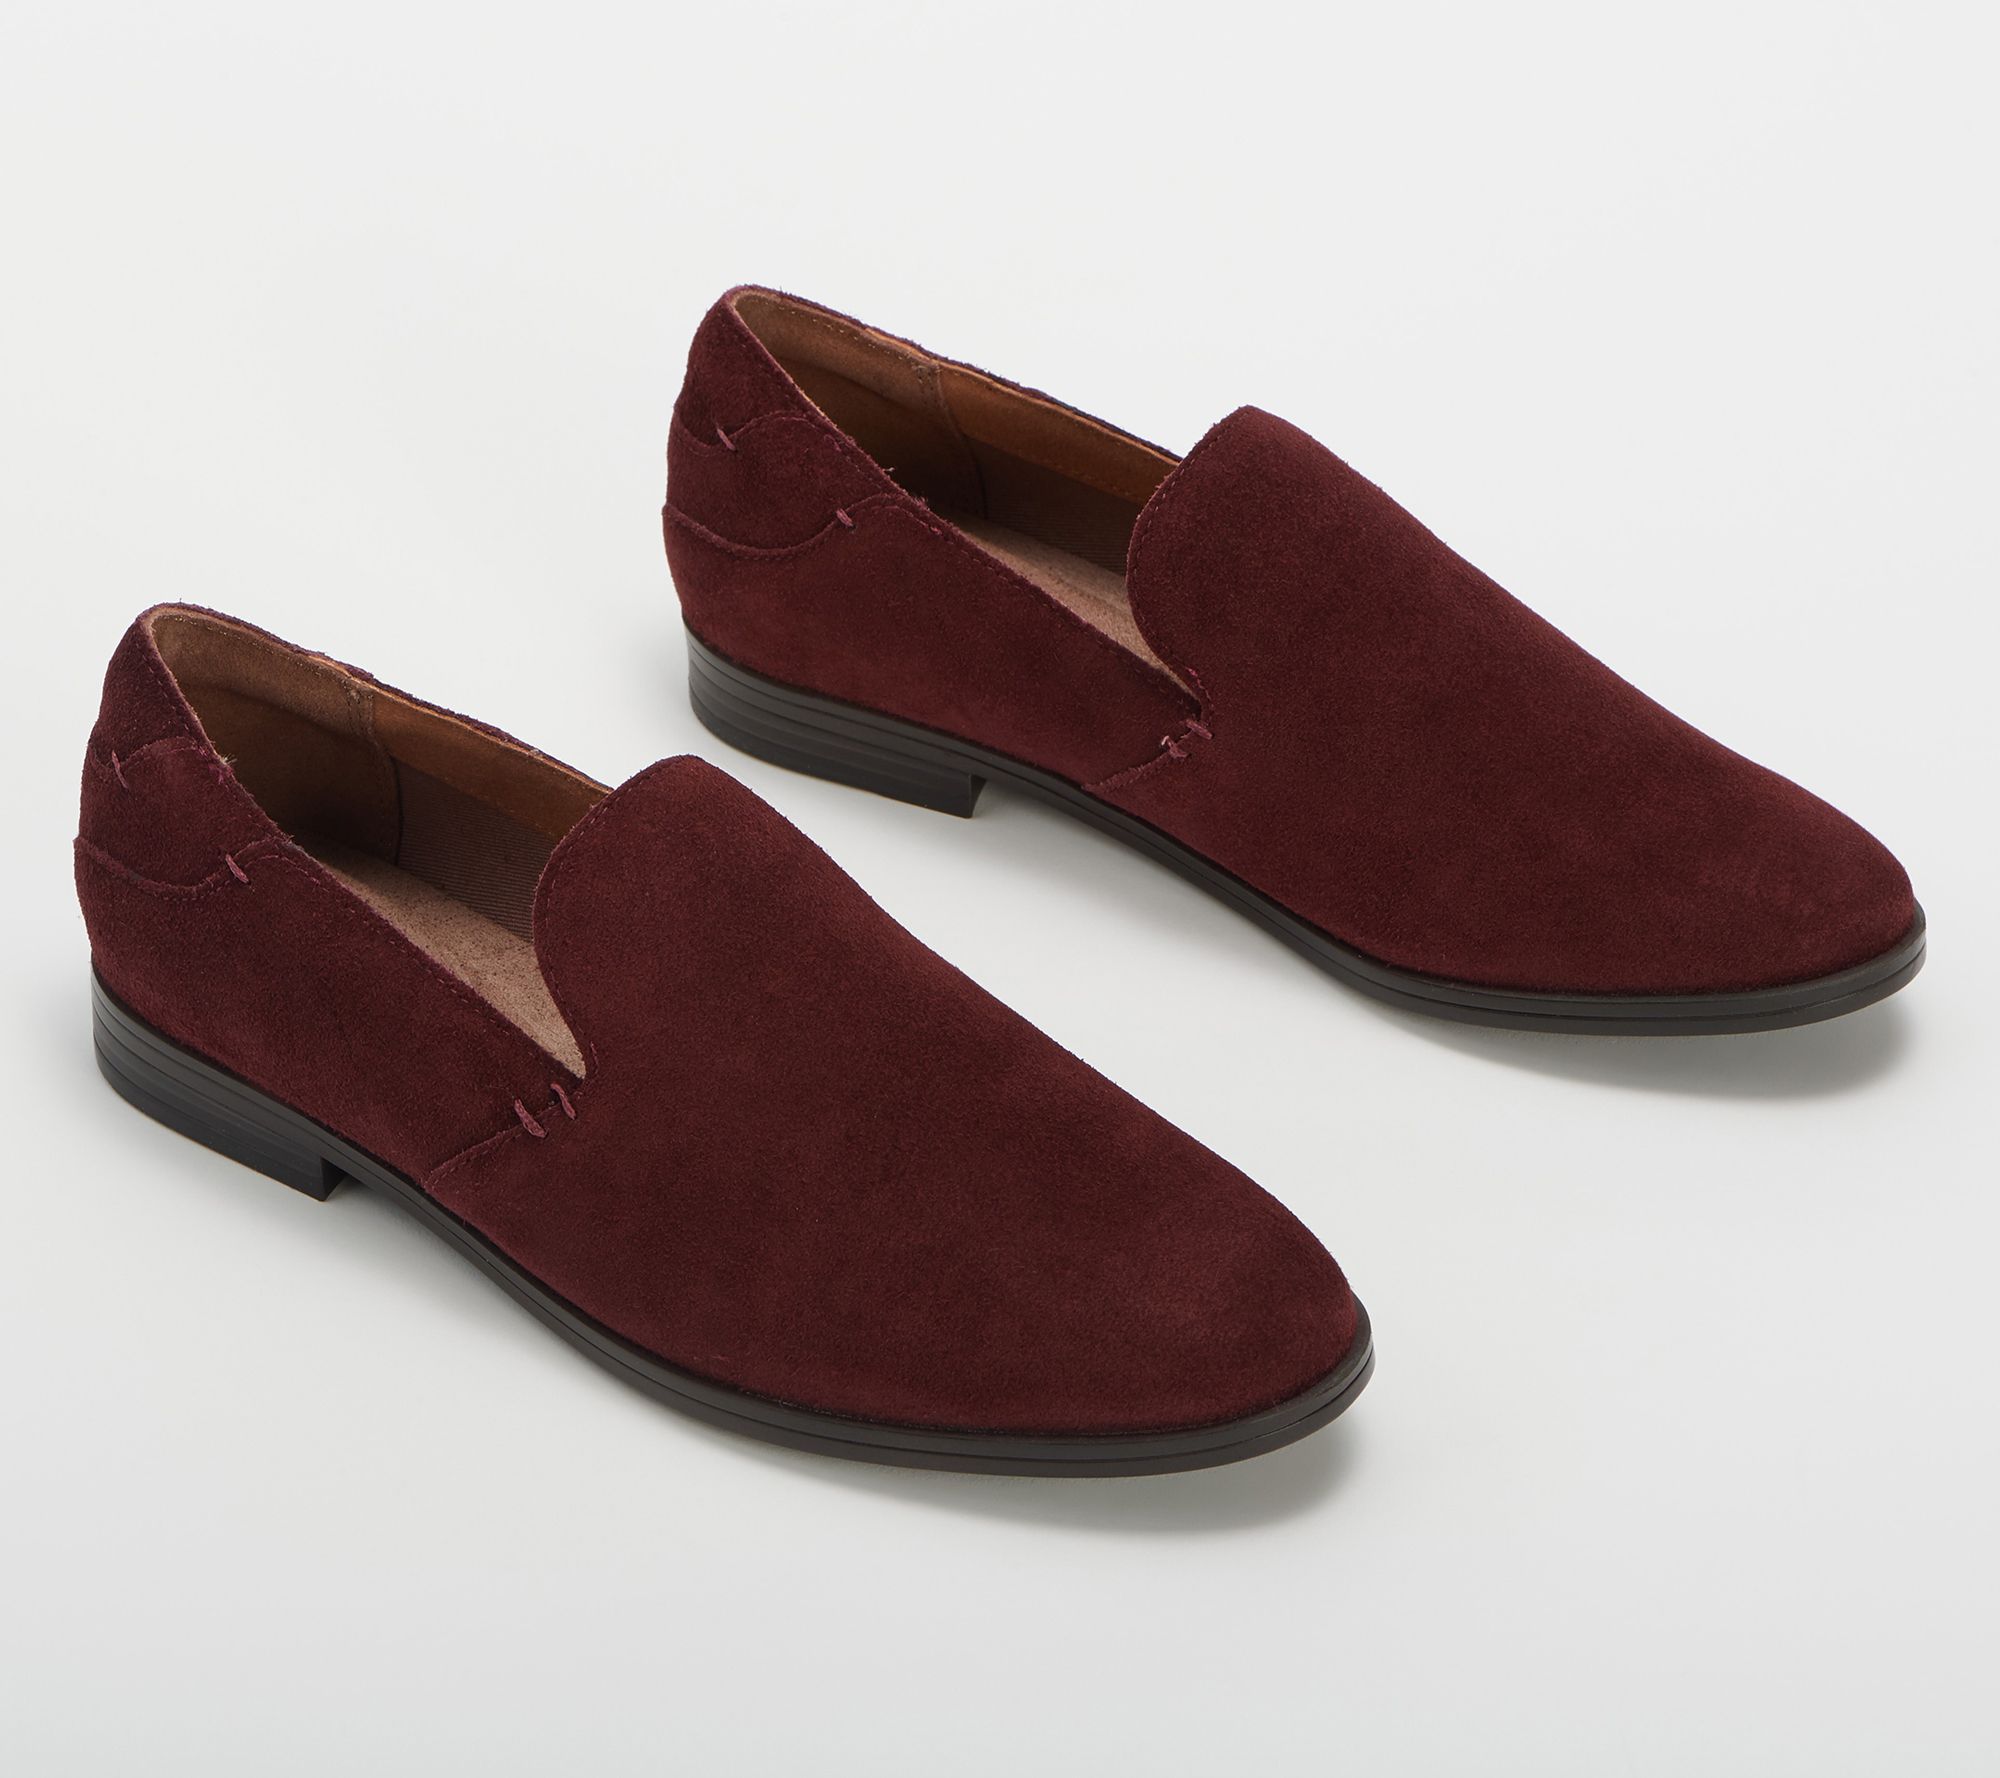 Rockport Suede Loafers - Perpetua - QVC.com